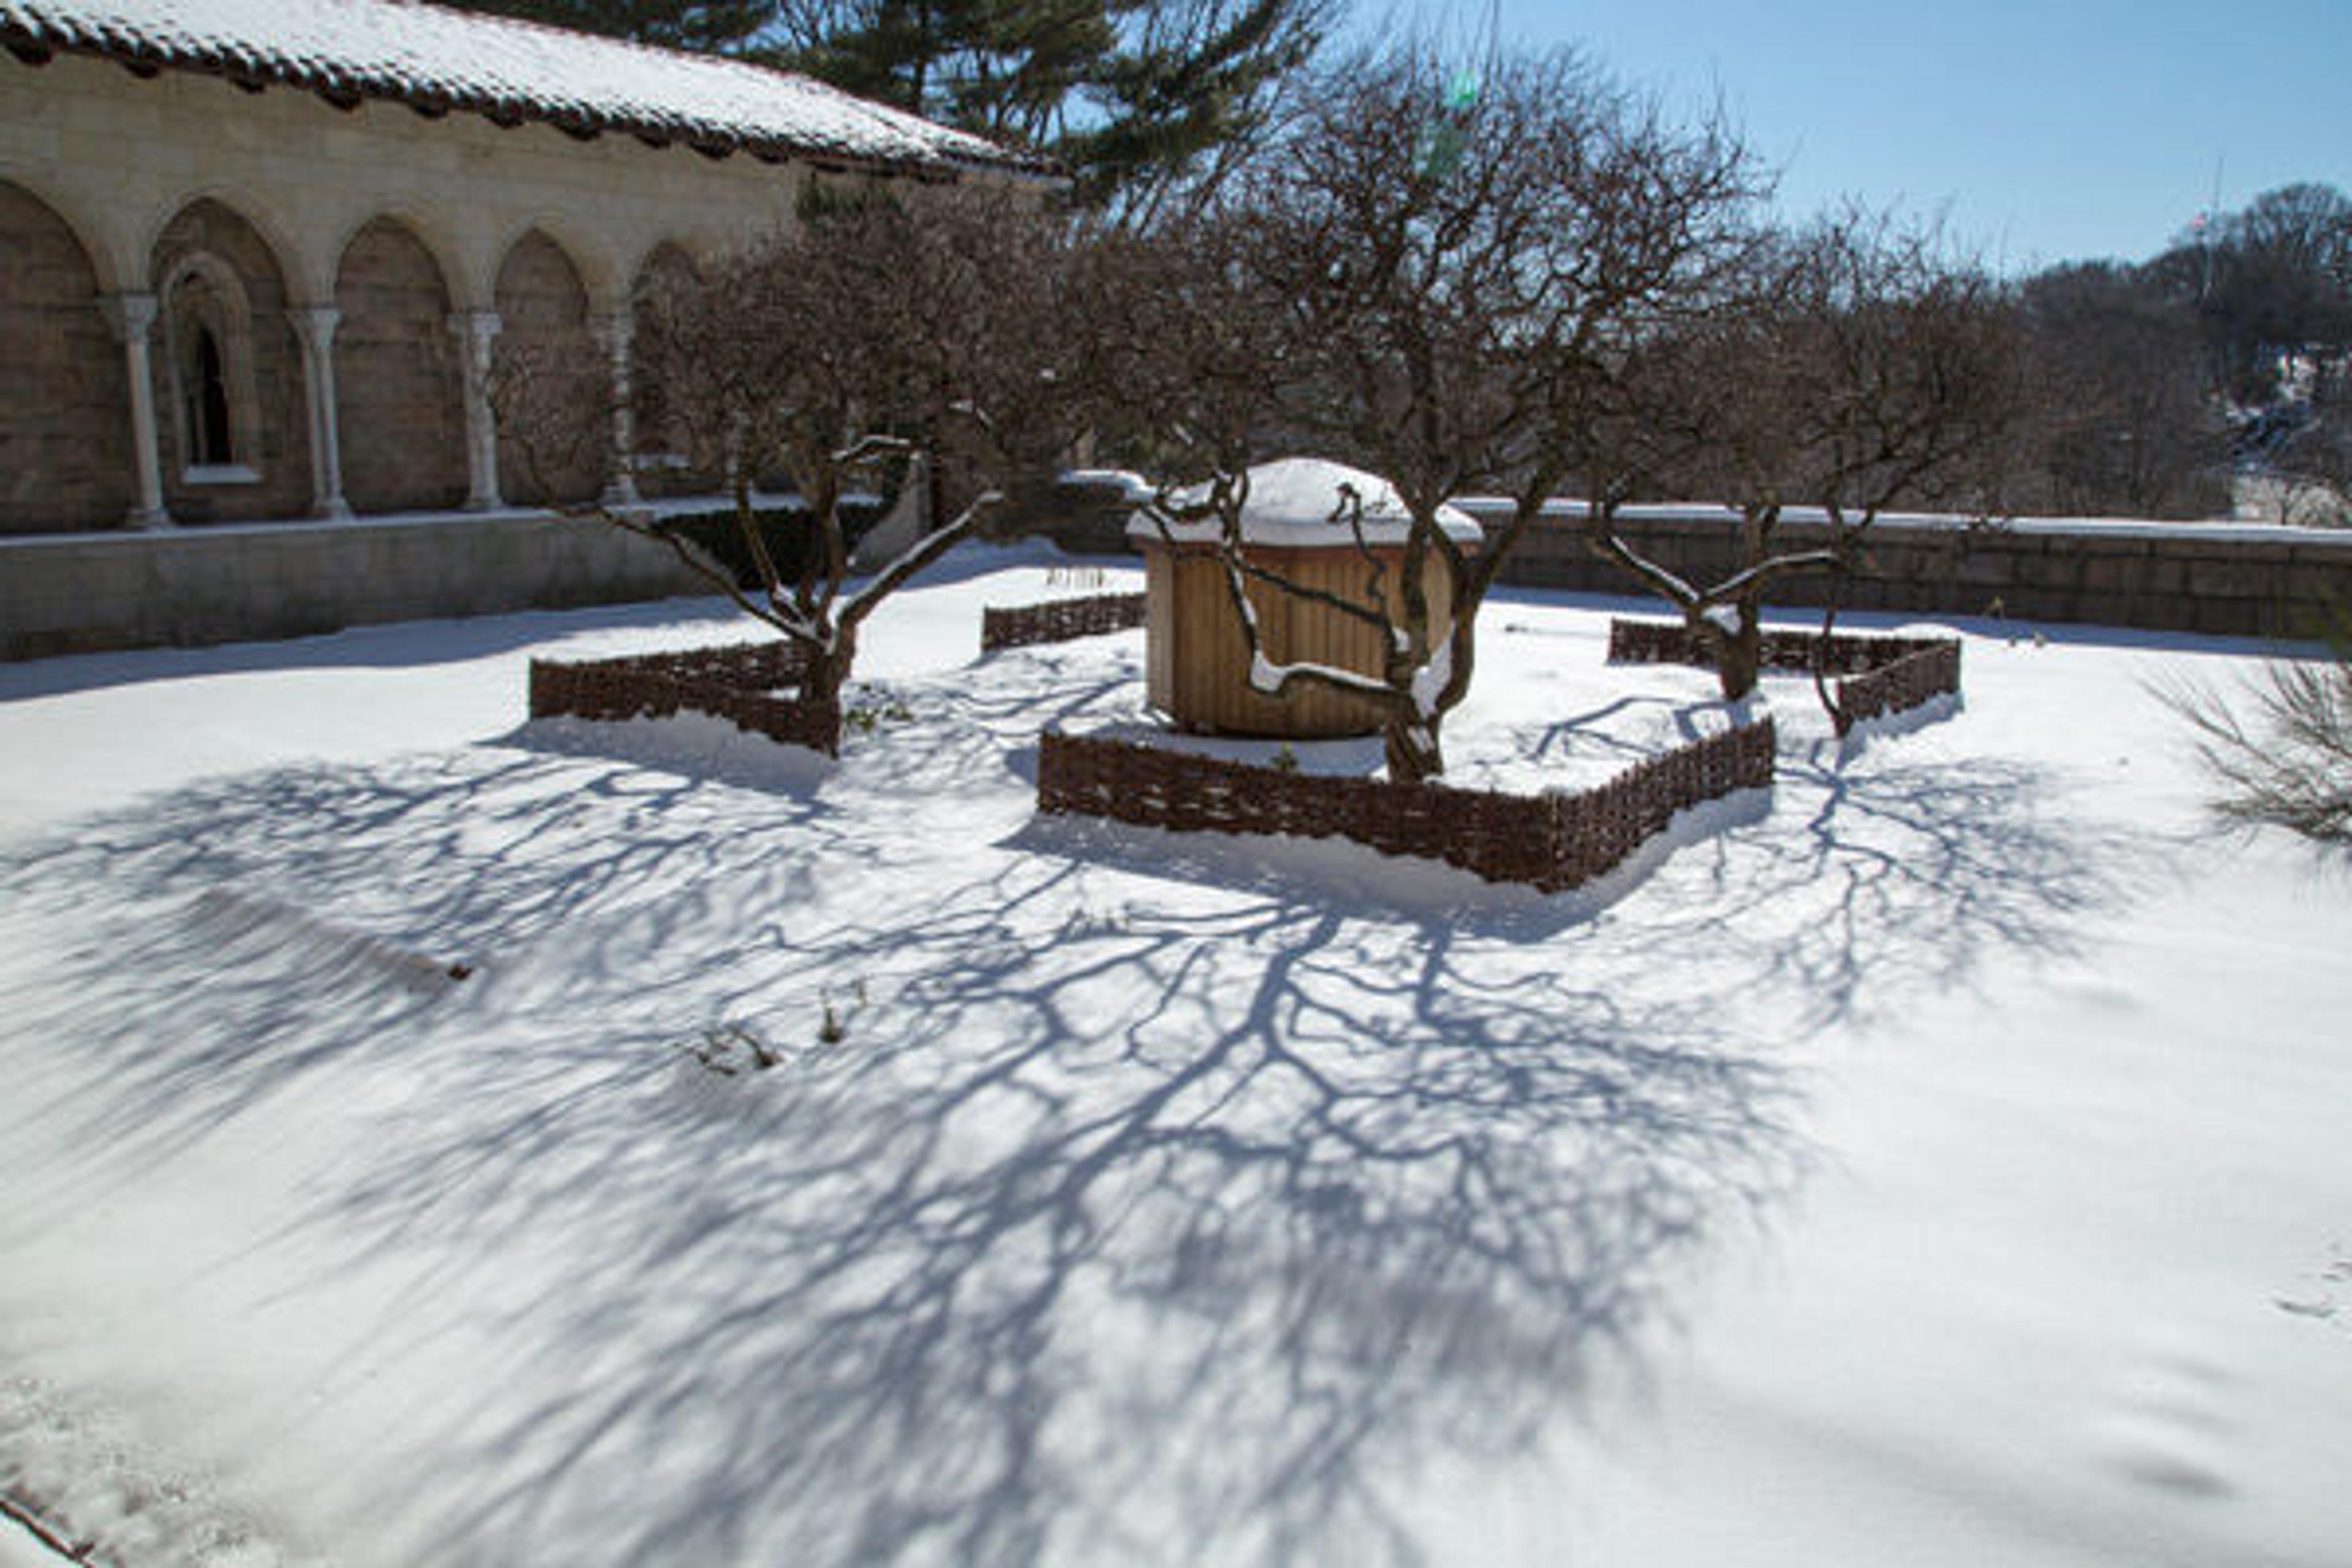 The trees cast shadows in the snow in the Bonnefont Cloister